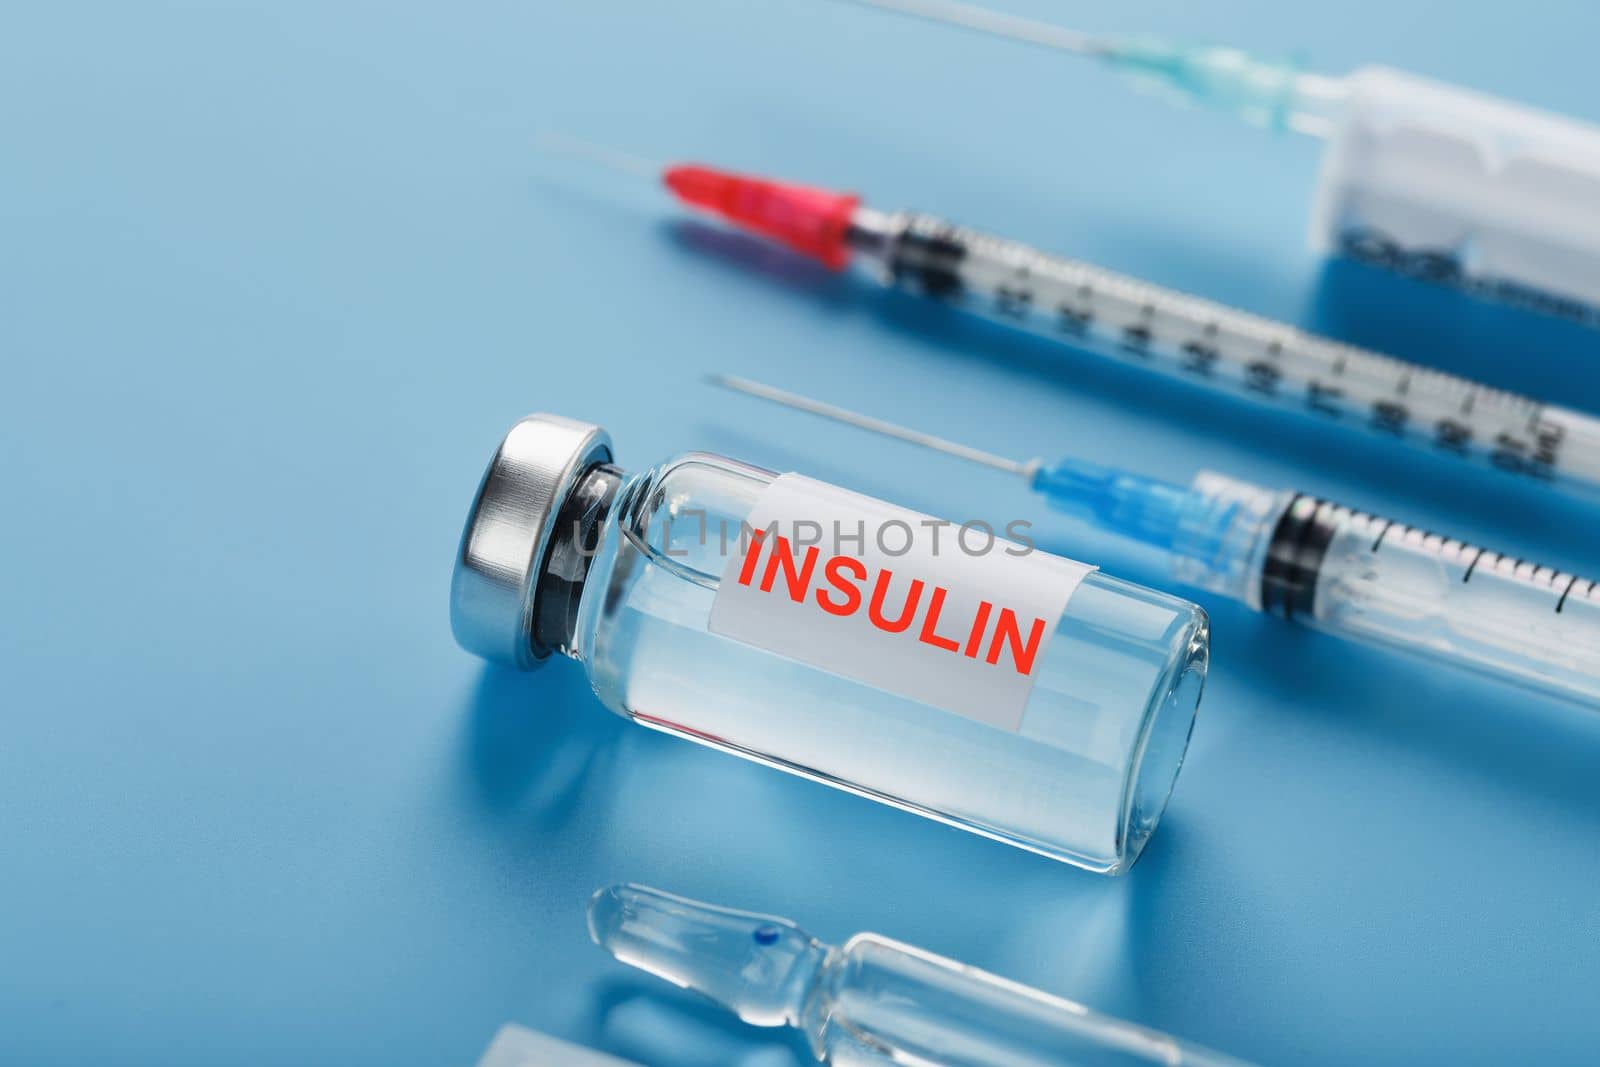 Medicine in ampoules with insulin, needles and syringes for medical subcutaneous injection by AlexGrec